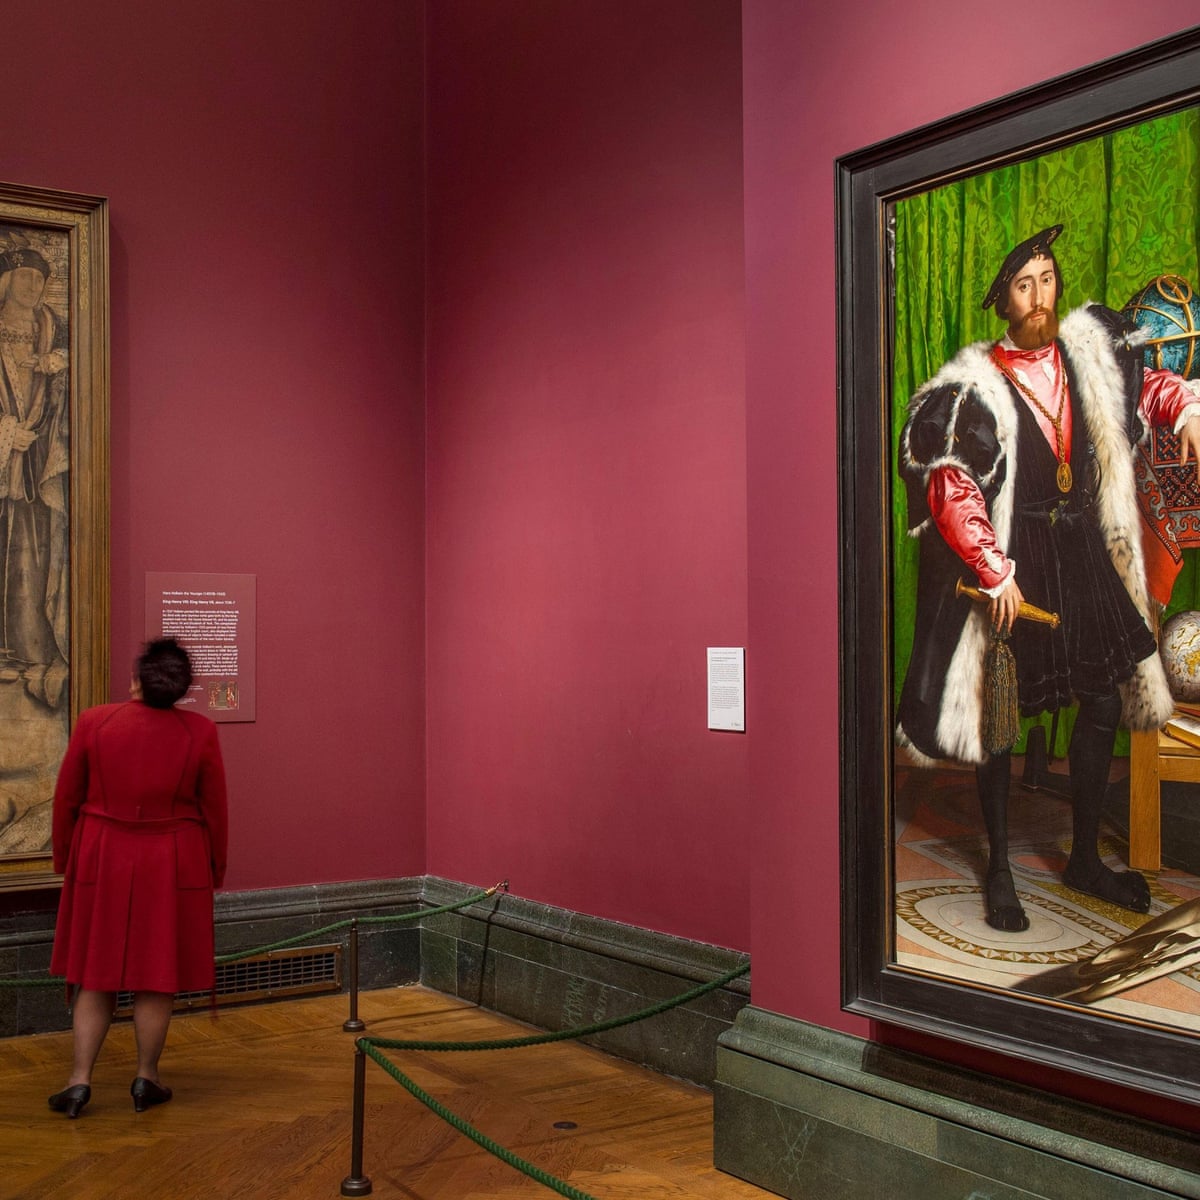 Holbein's Henry VIII joins his Ambassadors at National Gallery | National  Portrait Gallery | The Guardian